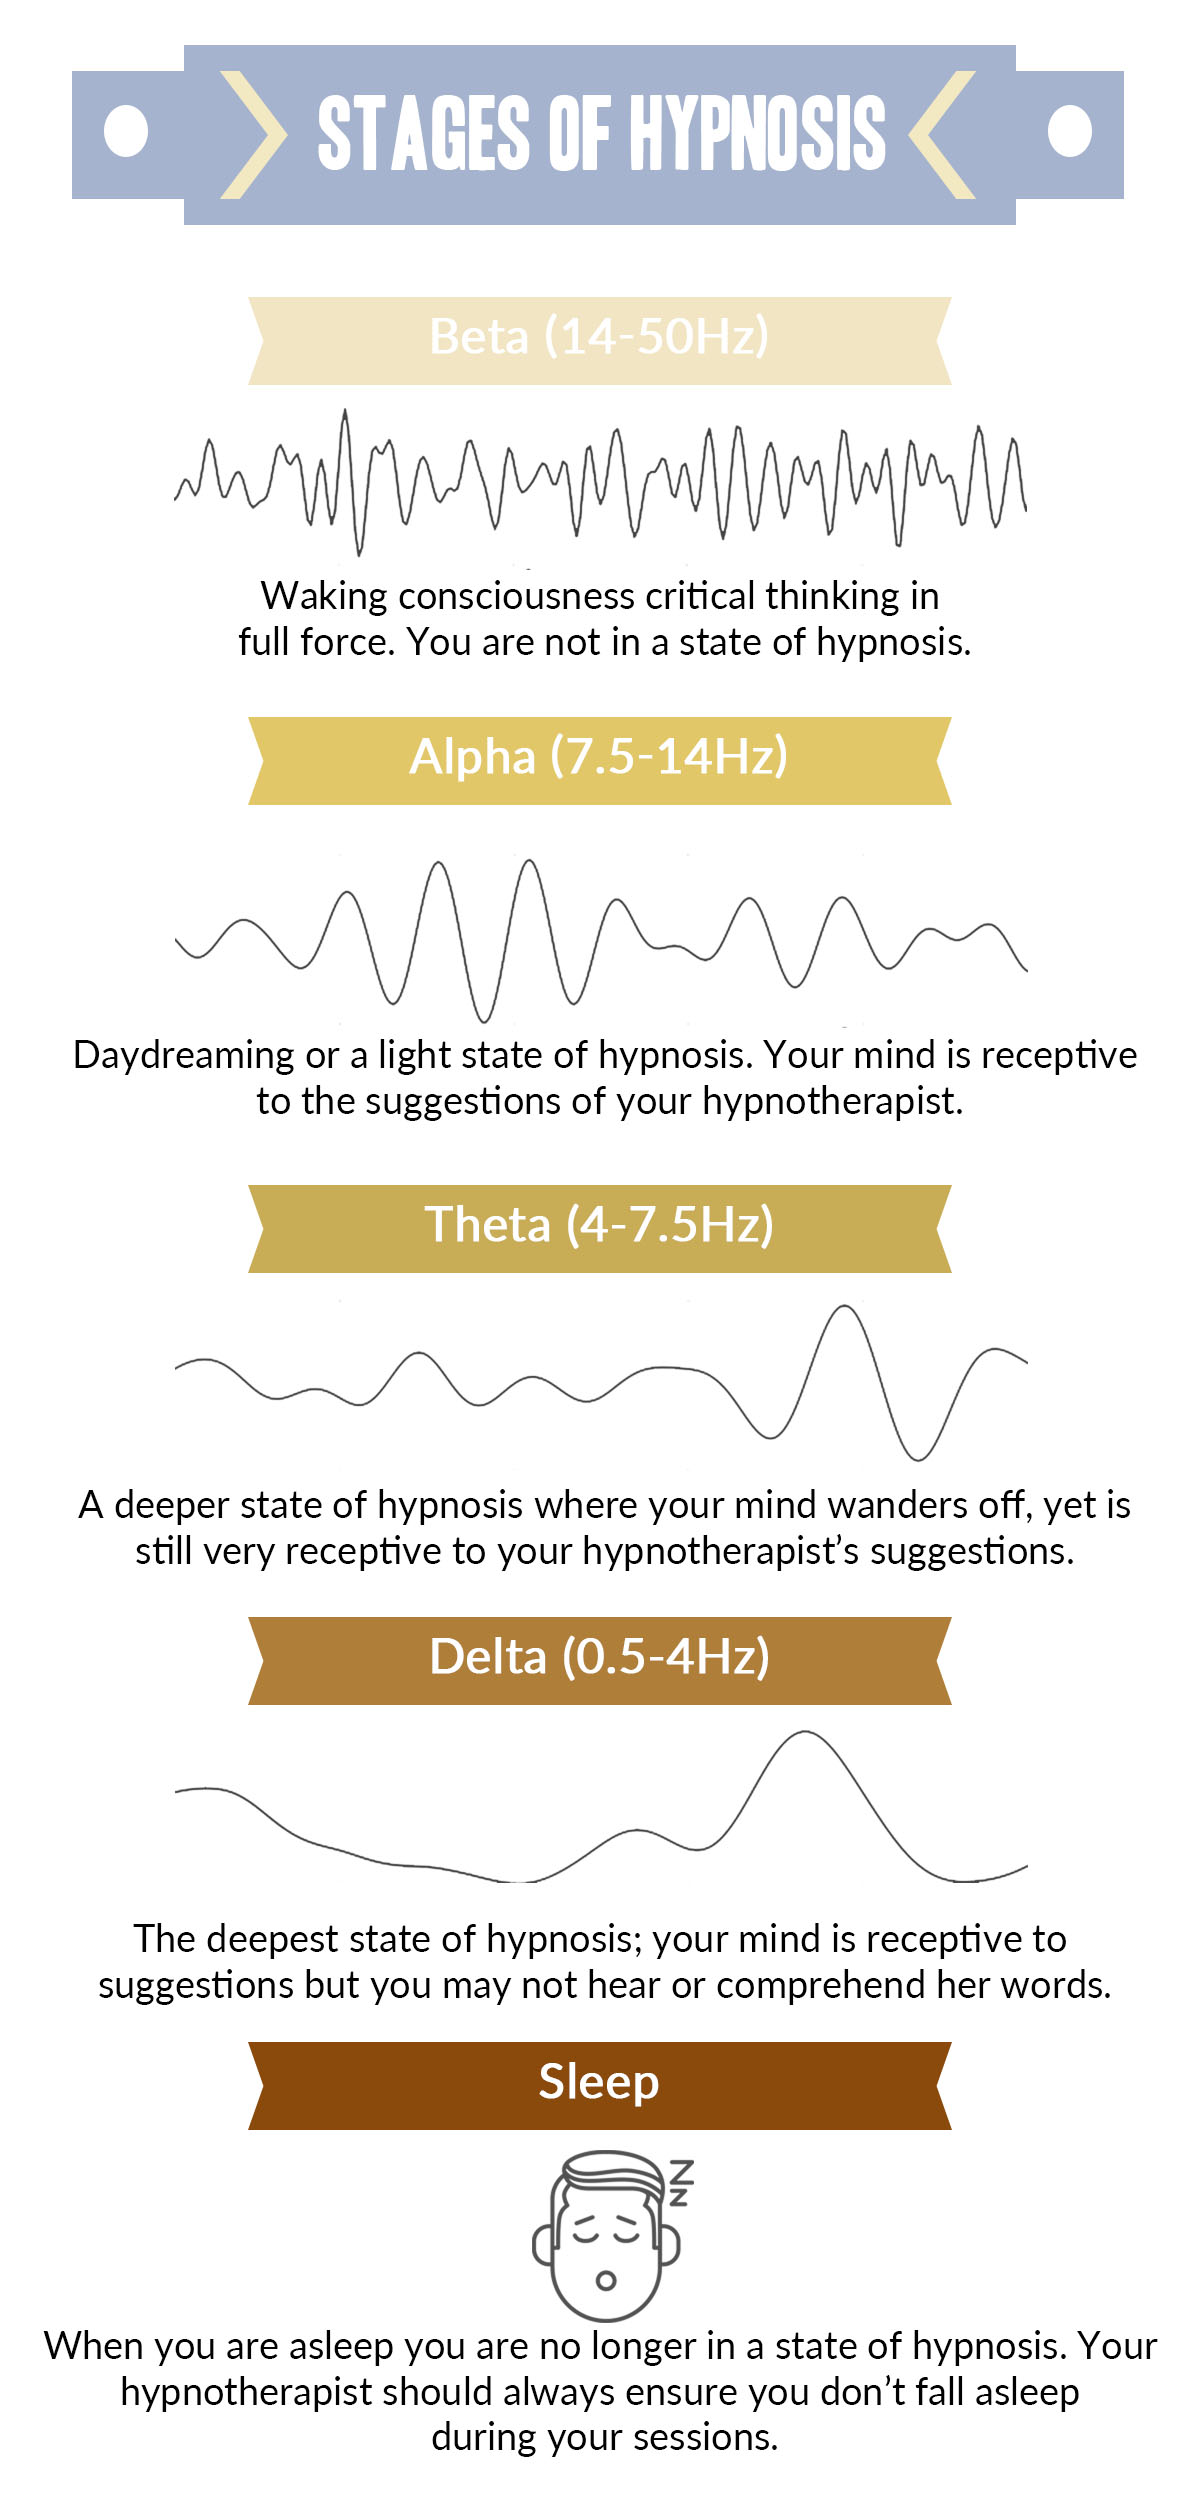 Melbourne clinical hypnotherapist explains different stages of hypnosis, from beta through to alpha, theta and delta- and finally sleep, in this infographic